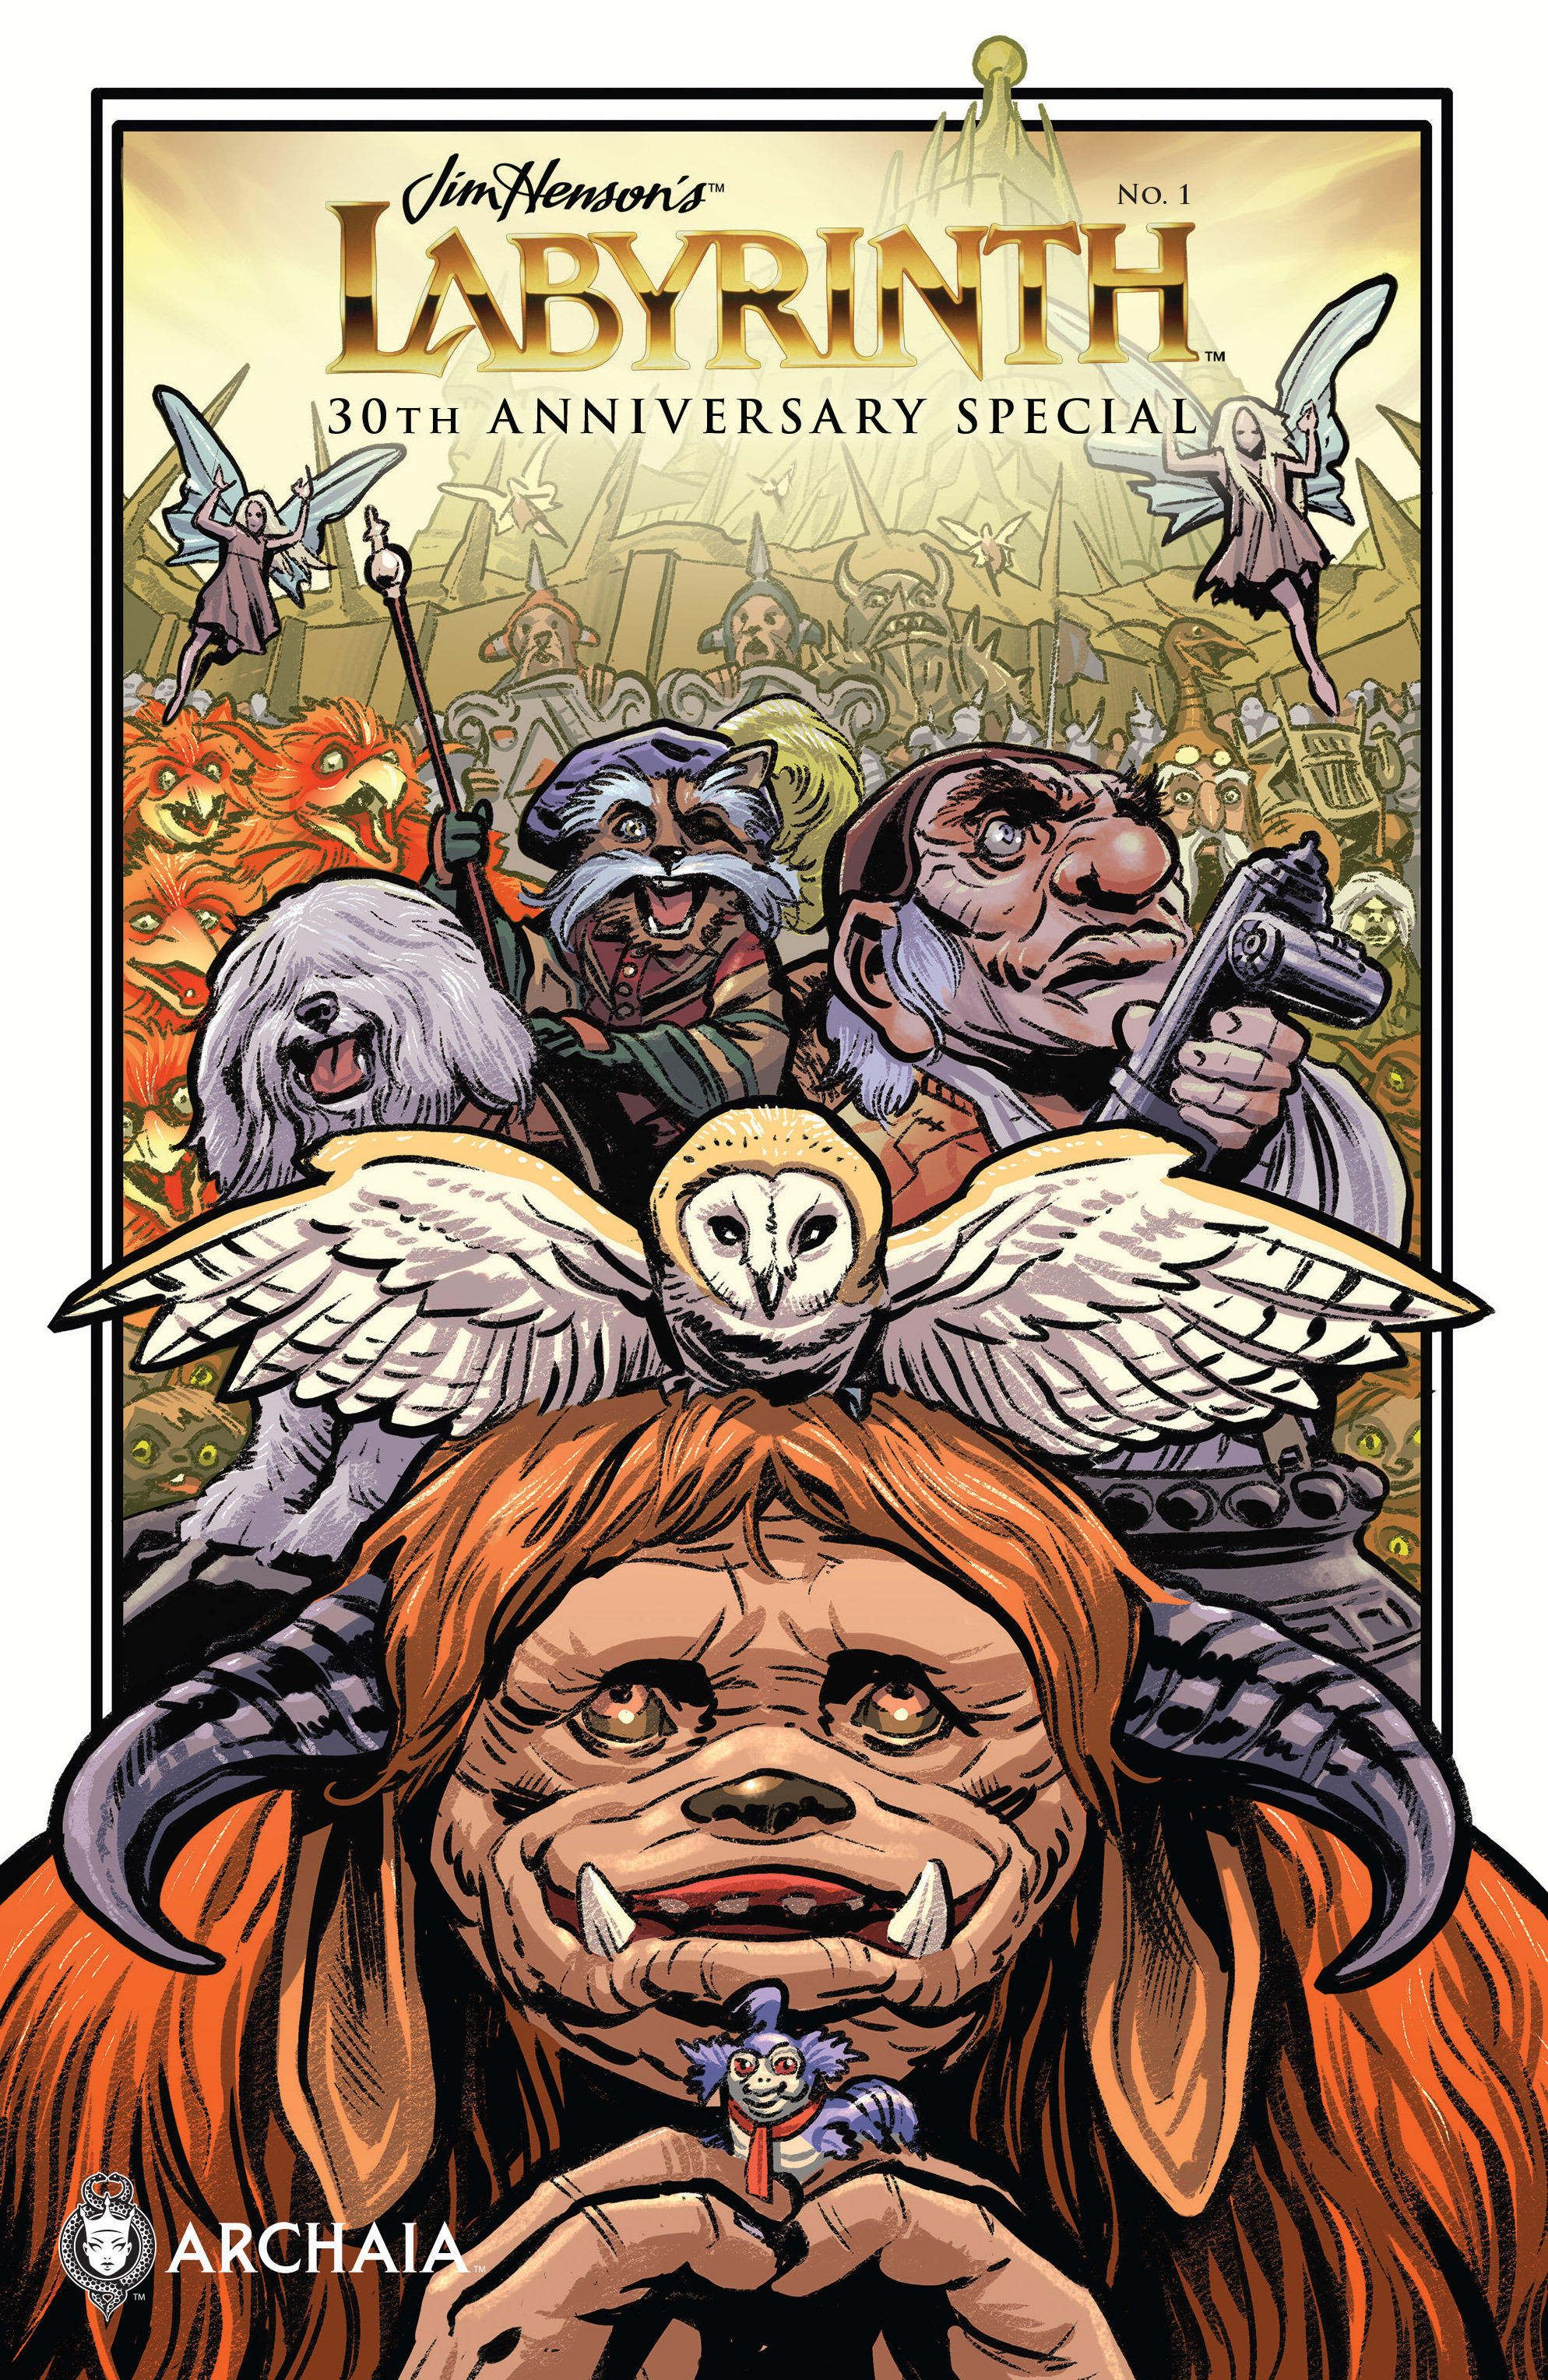 Read online Labyrinth 30th Anniversary Special comic -  Issue # Full - 1